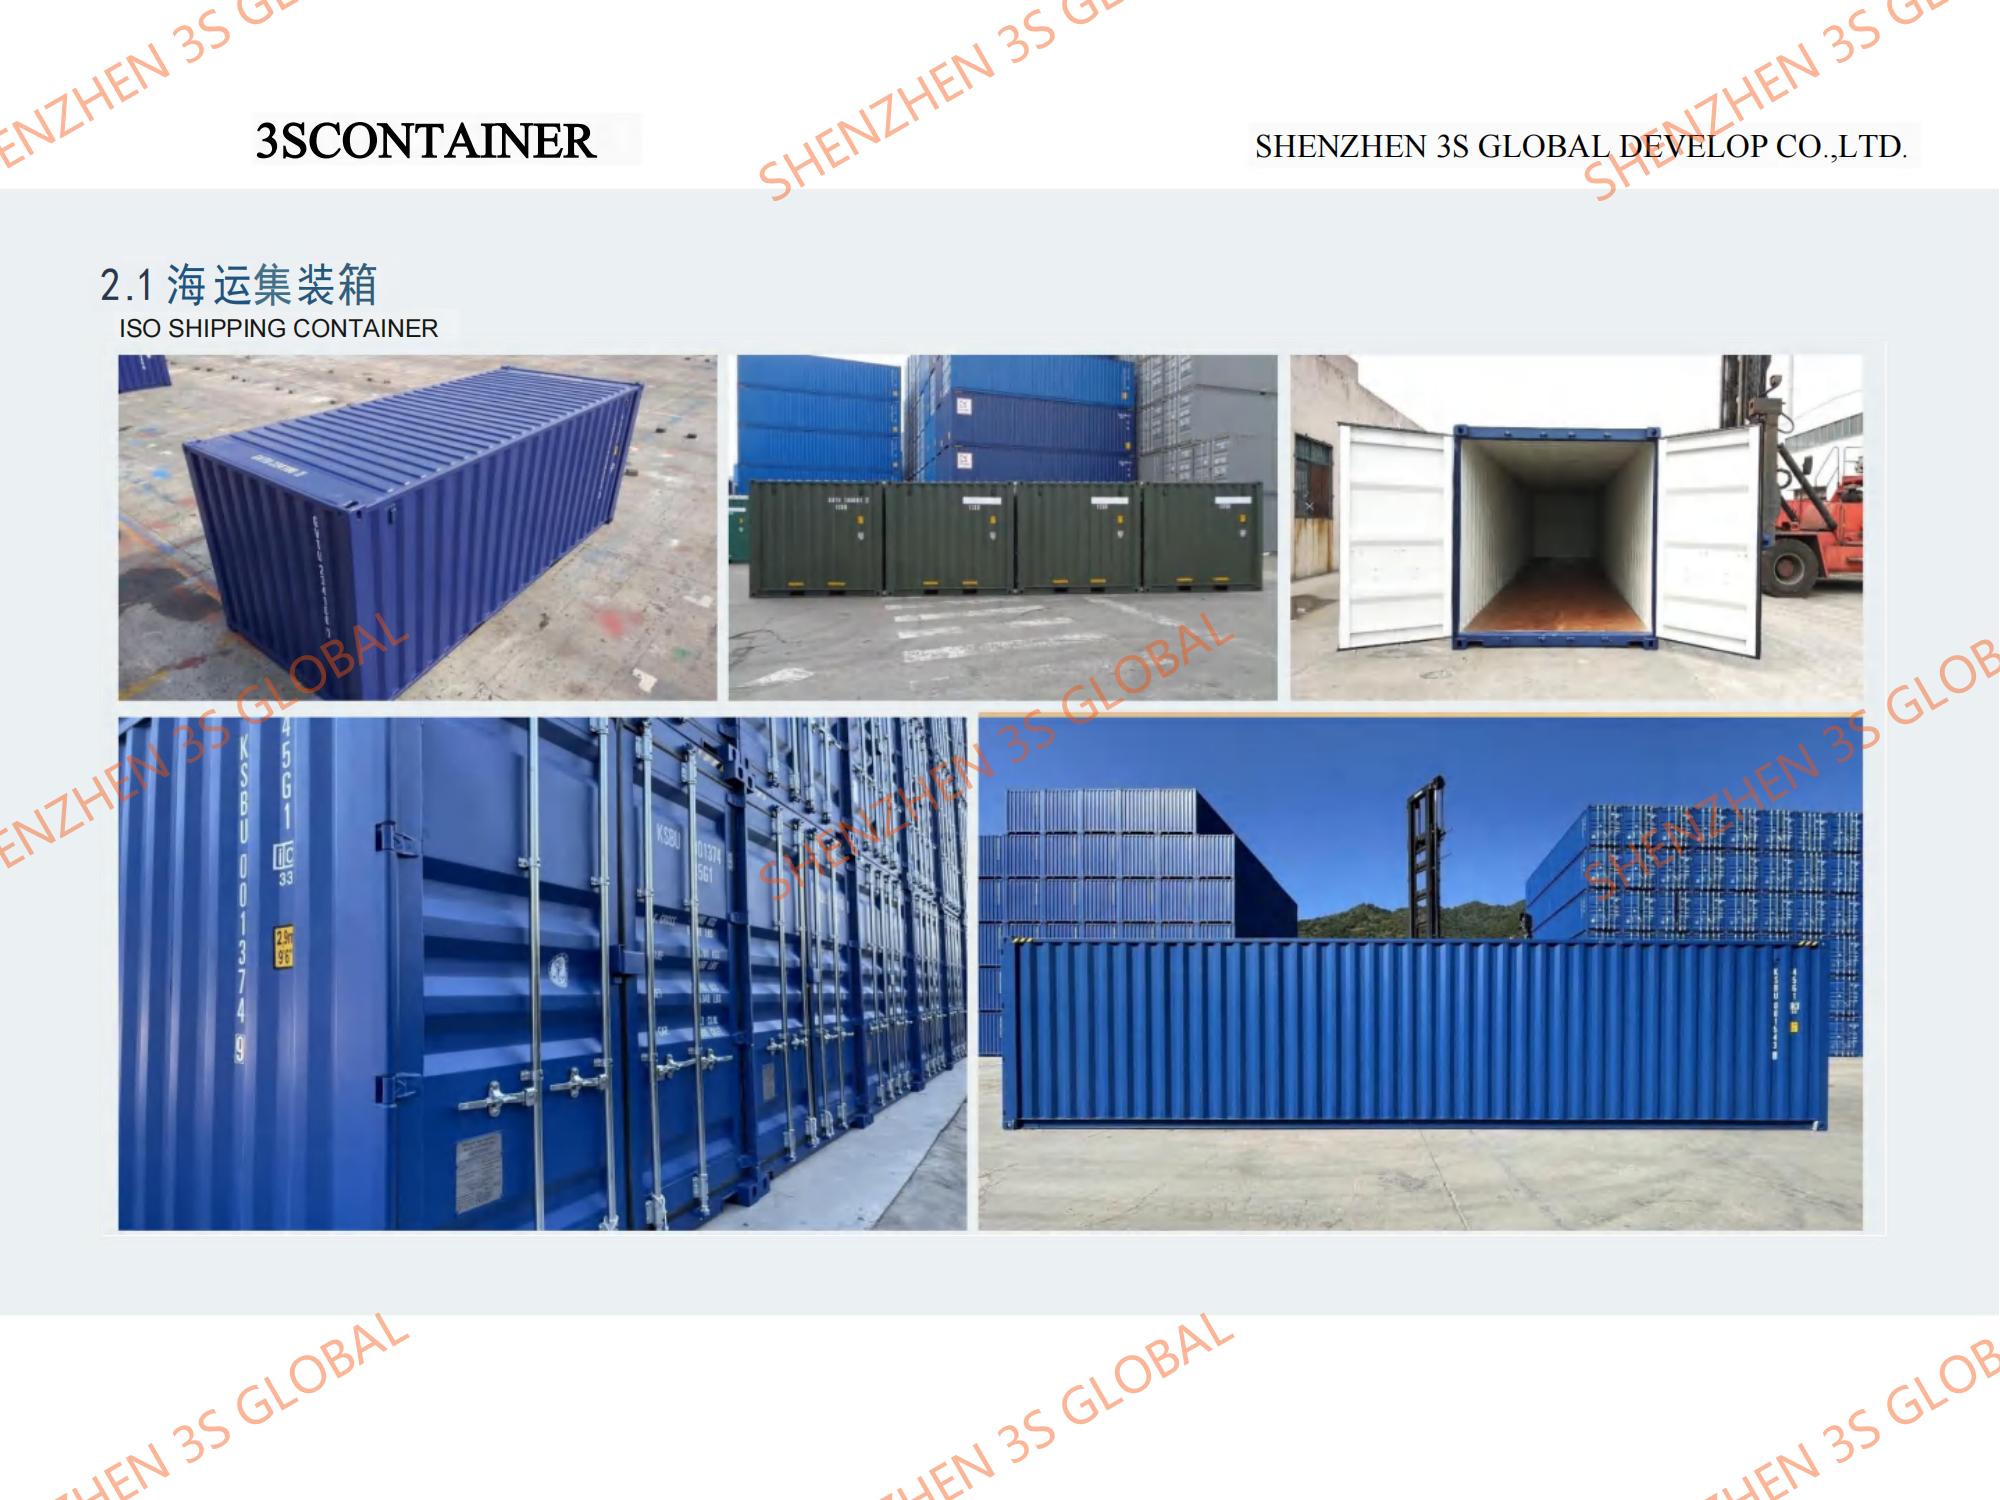 Manufacturing customized and personalized containers